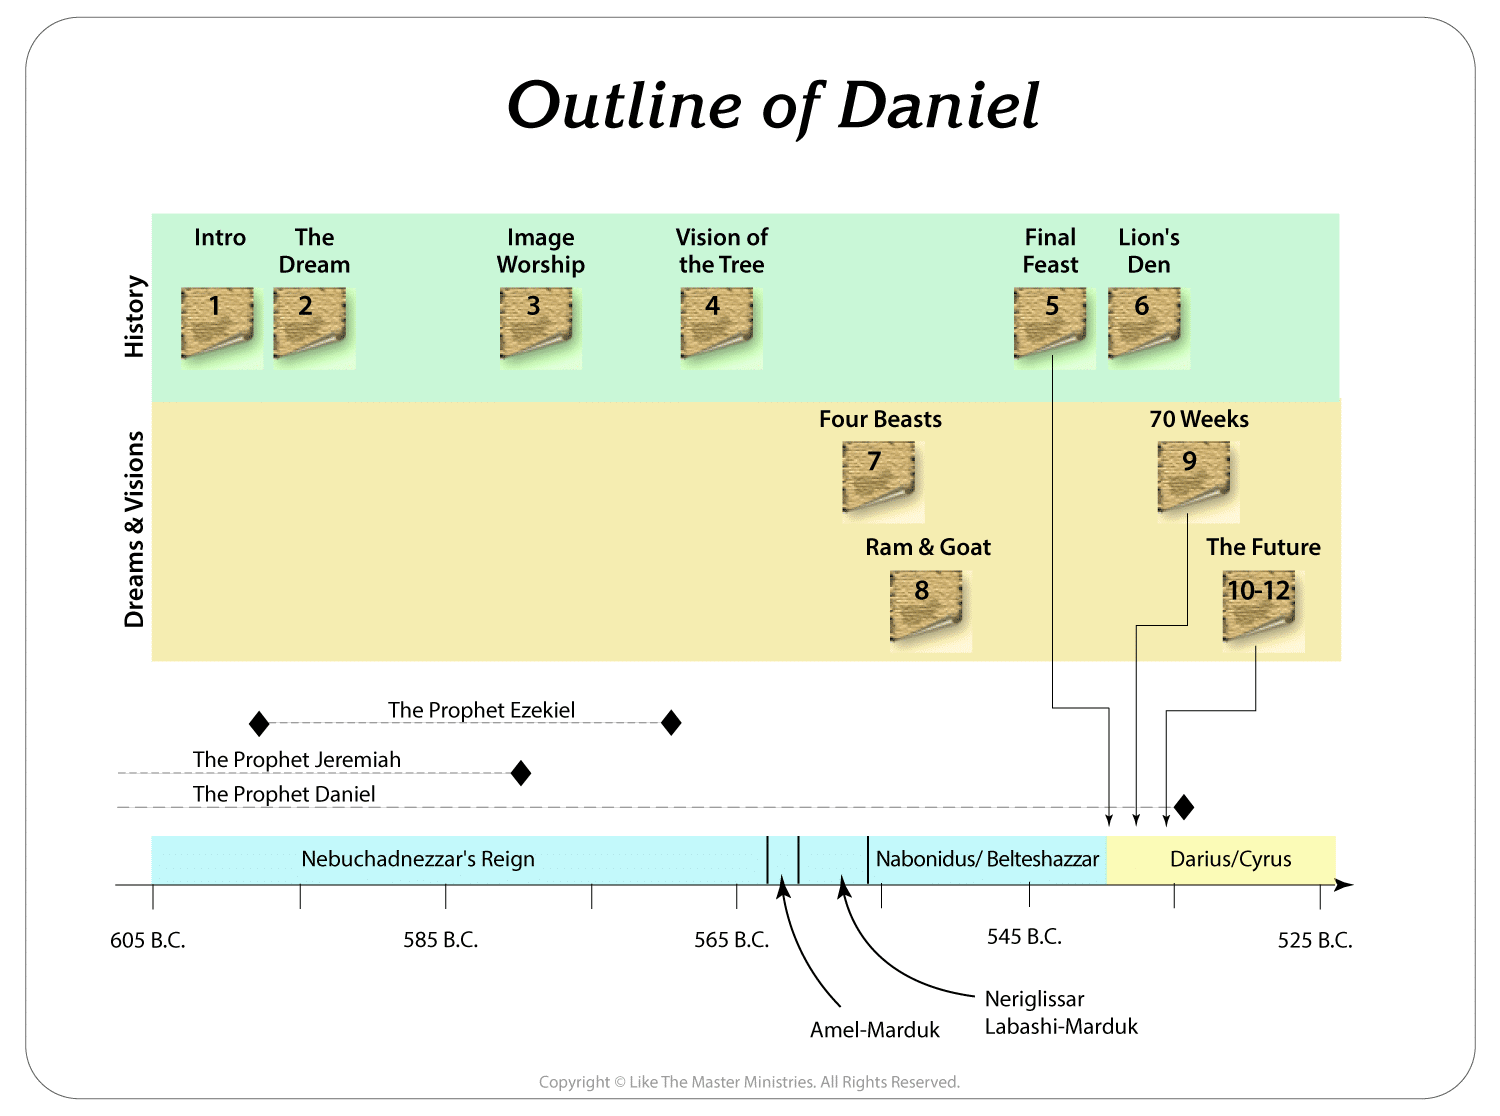 Outline of the Prophecy of Daniel